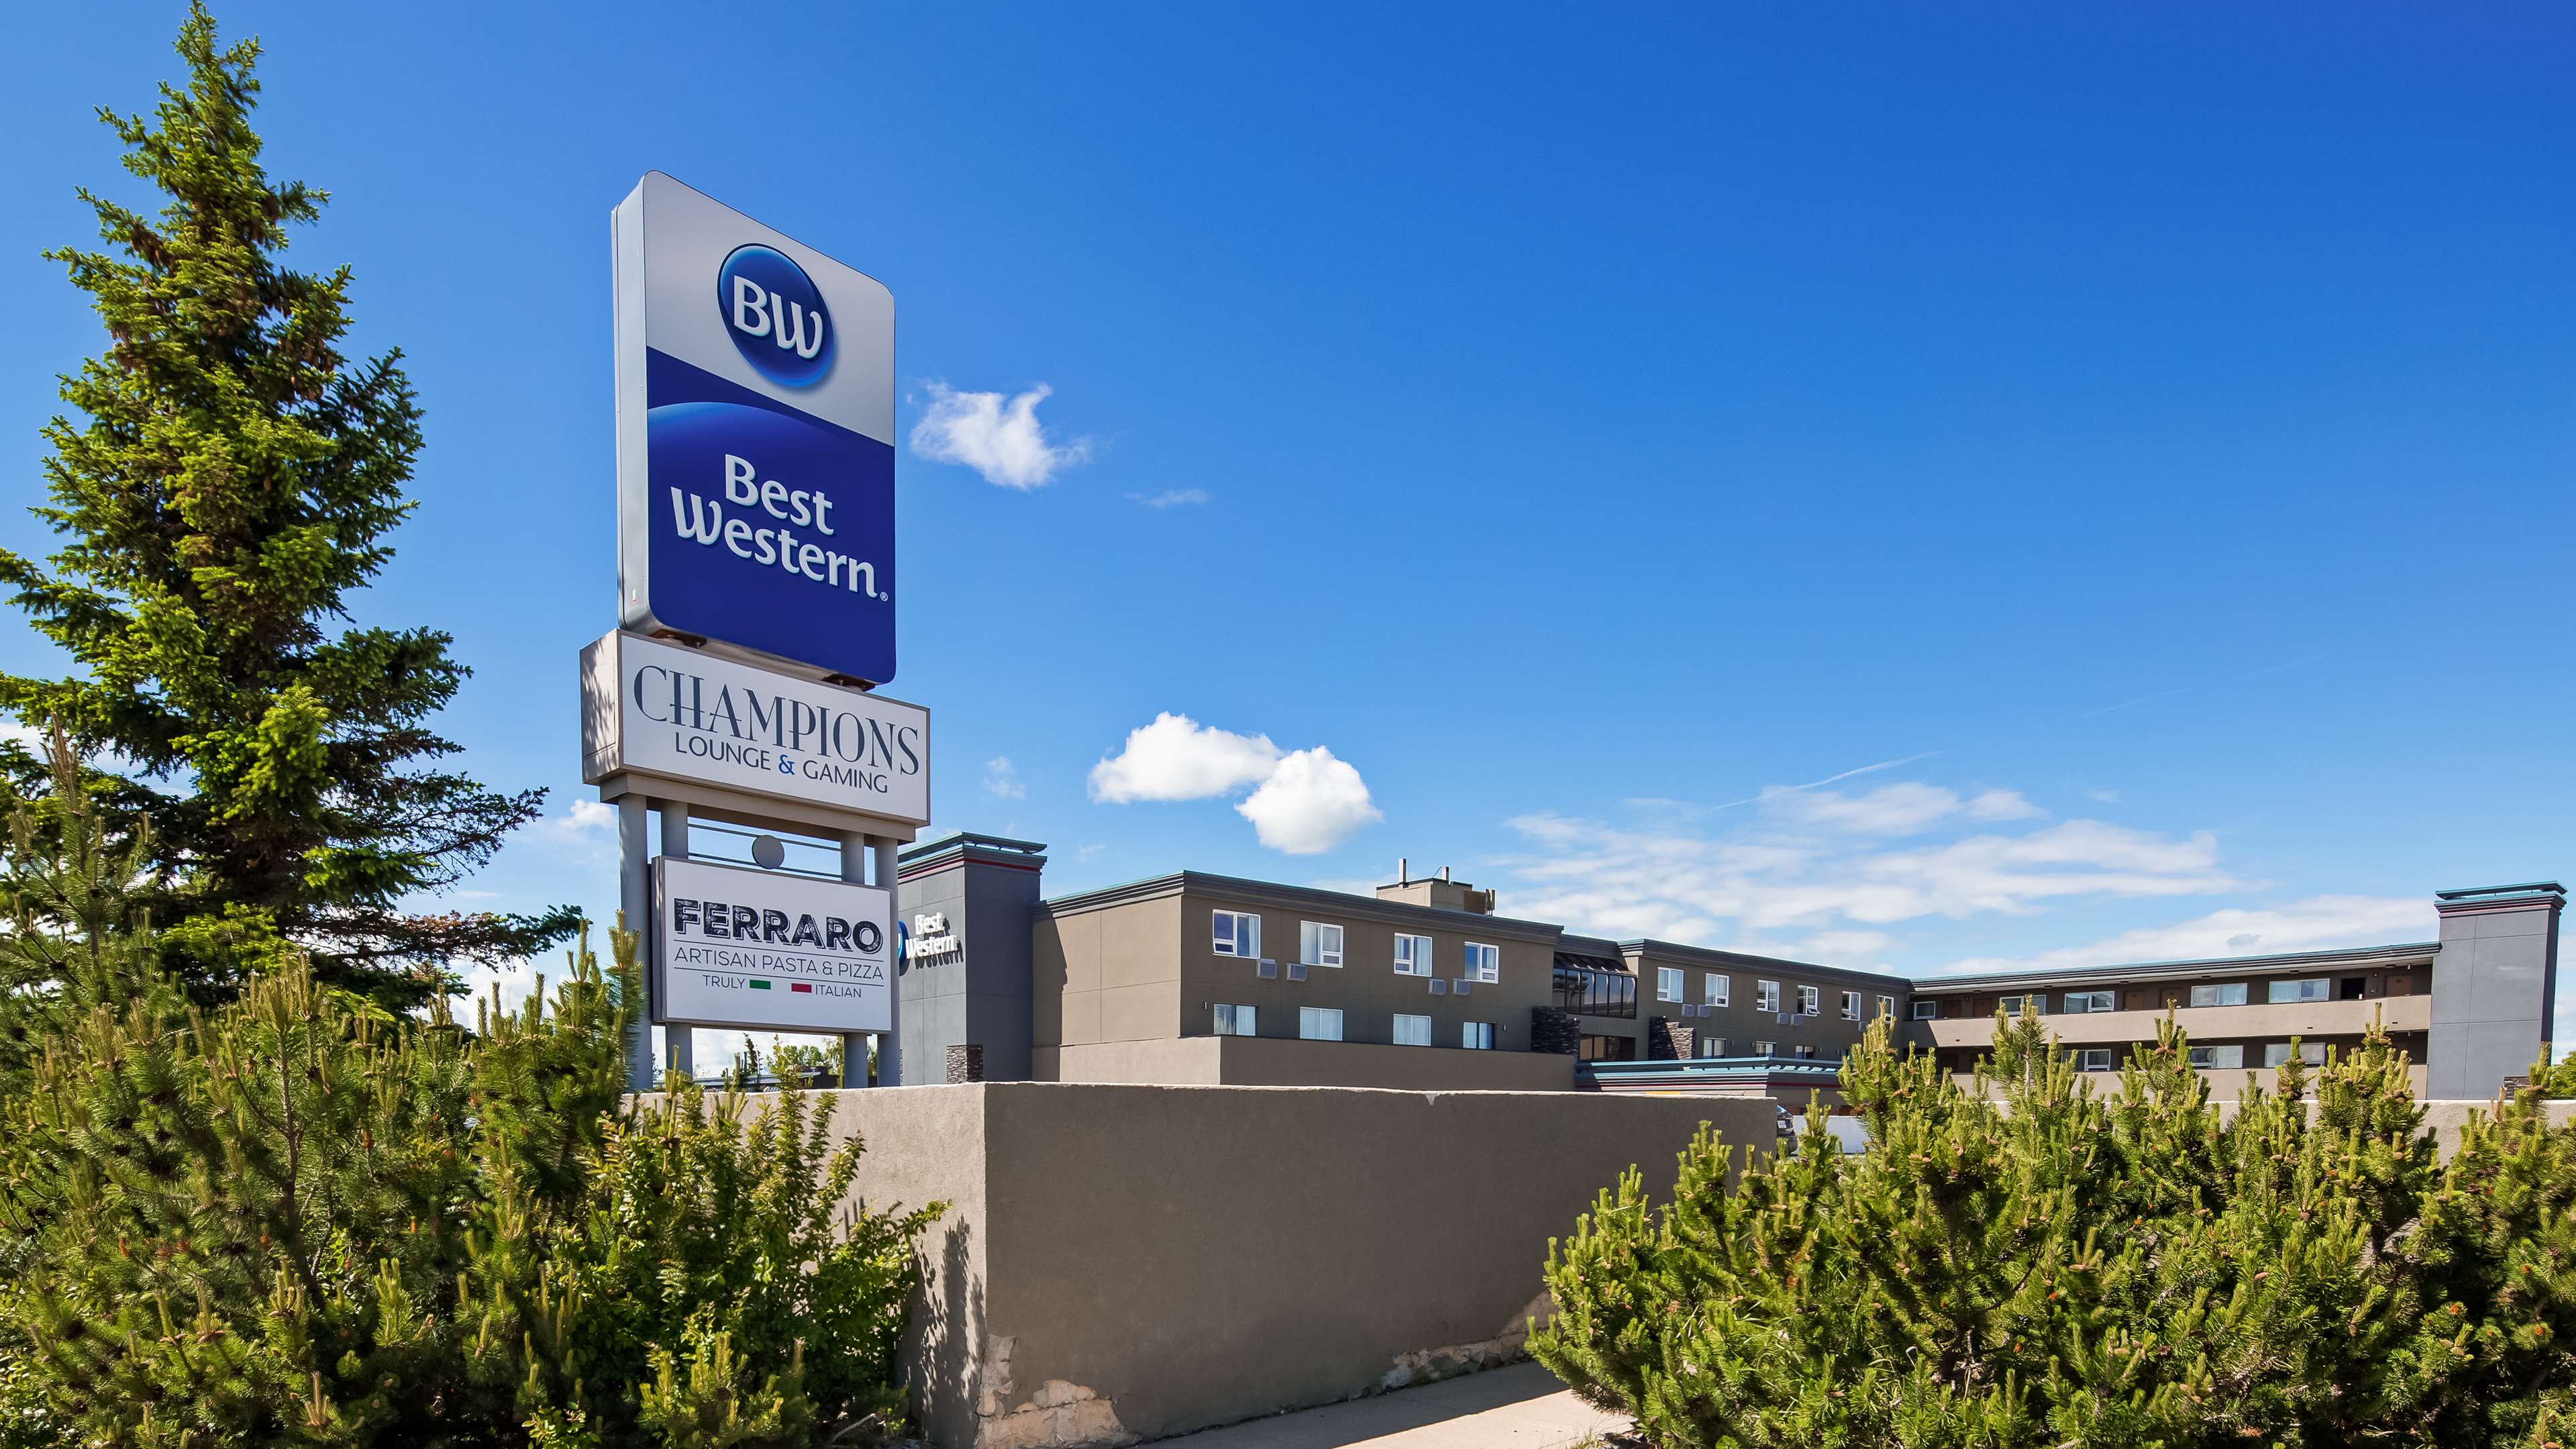 Best Western Airdrie in Airdrie: Full-service hotel easily located off Queen Elizabeth II Highway